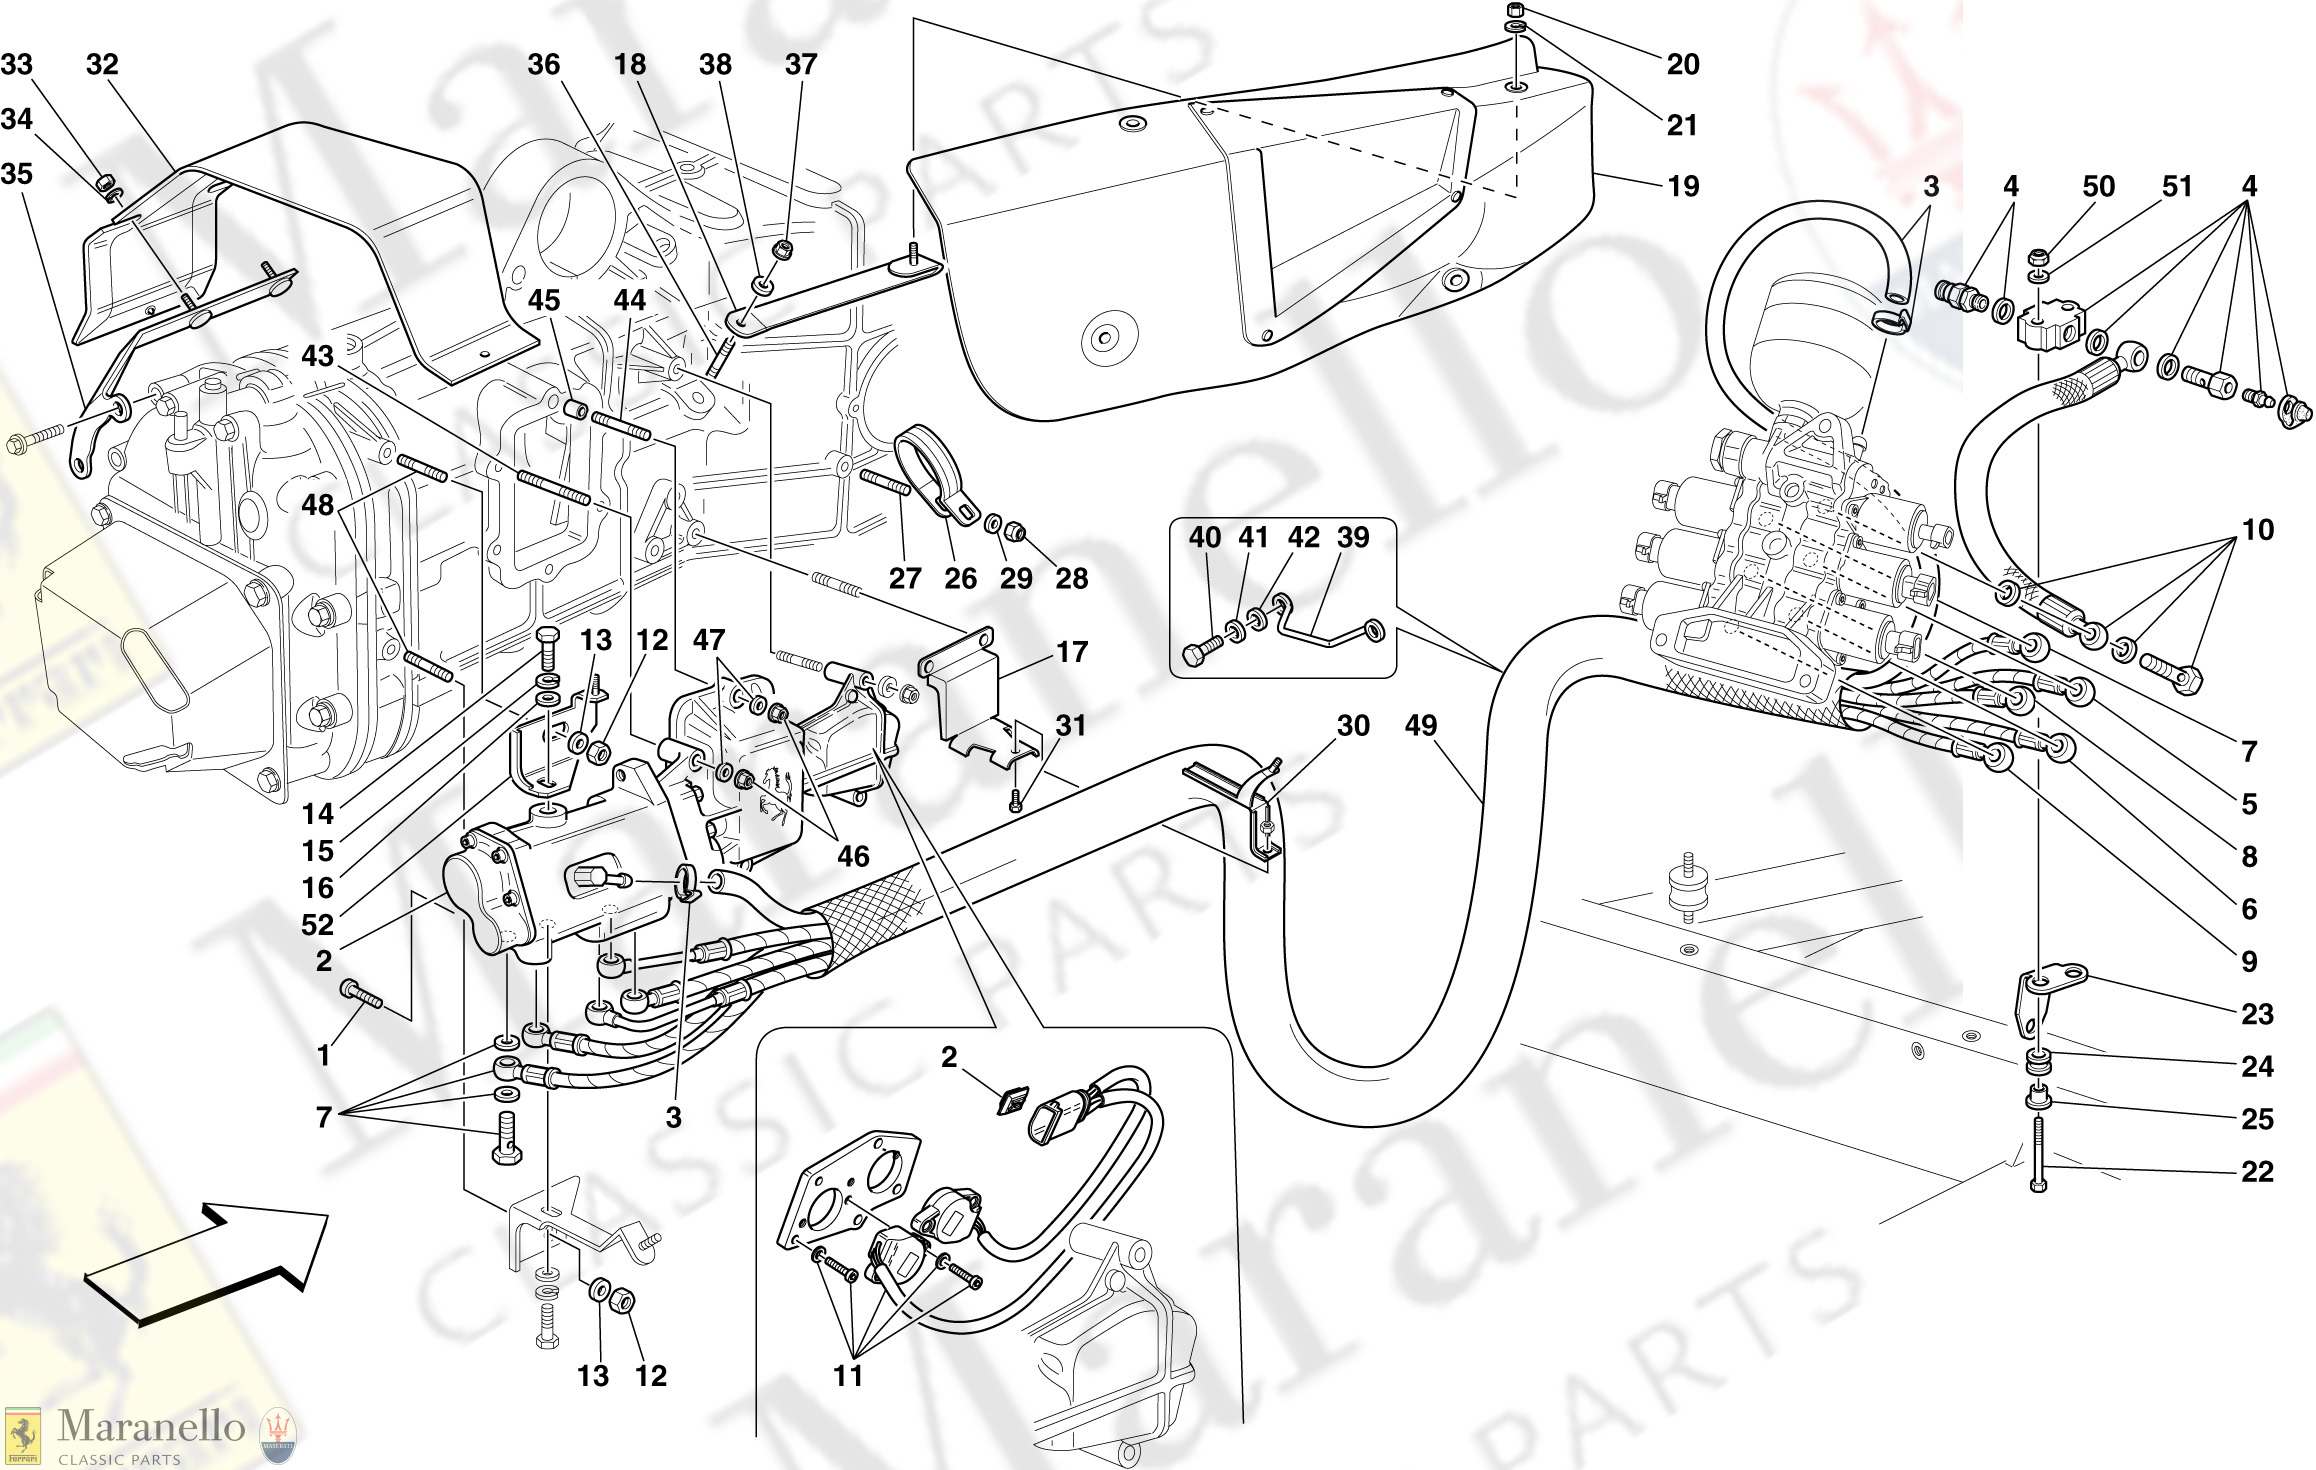 027 - F1 Gearbox And Clutch Hydraulic Control -Applicable For F1-